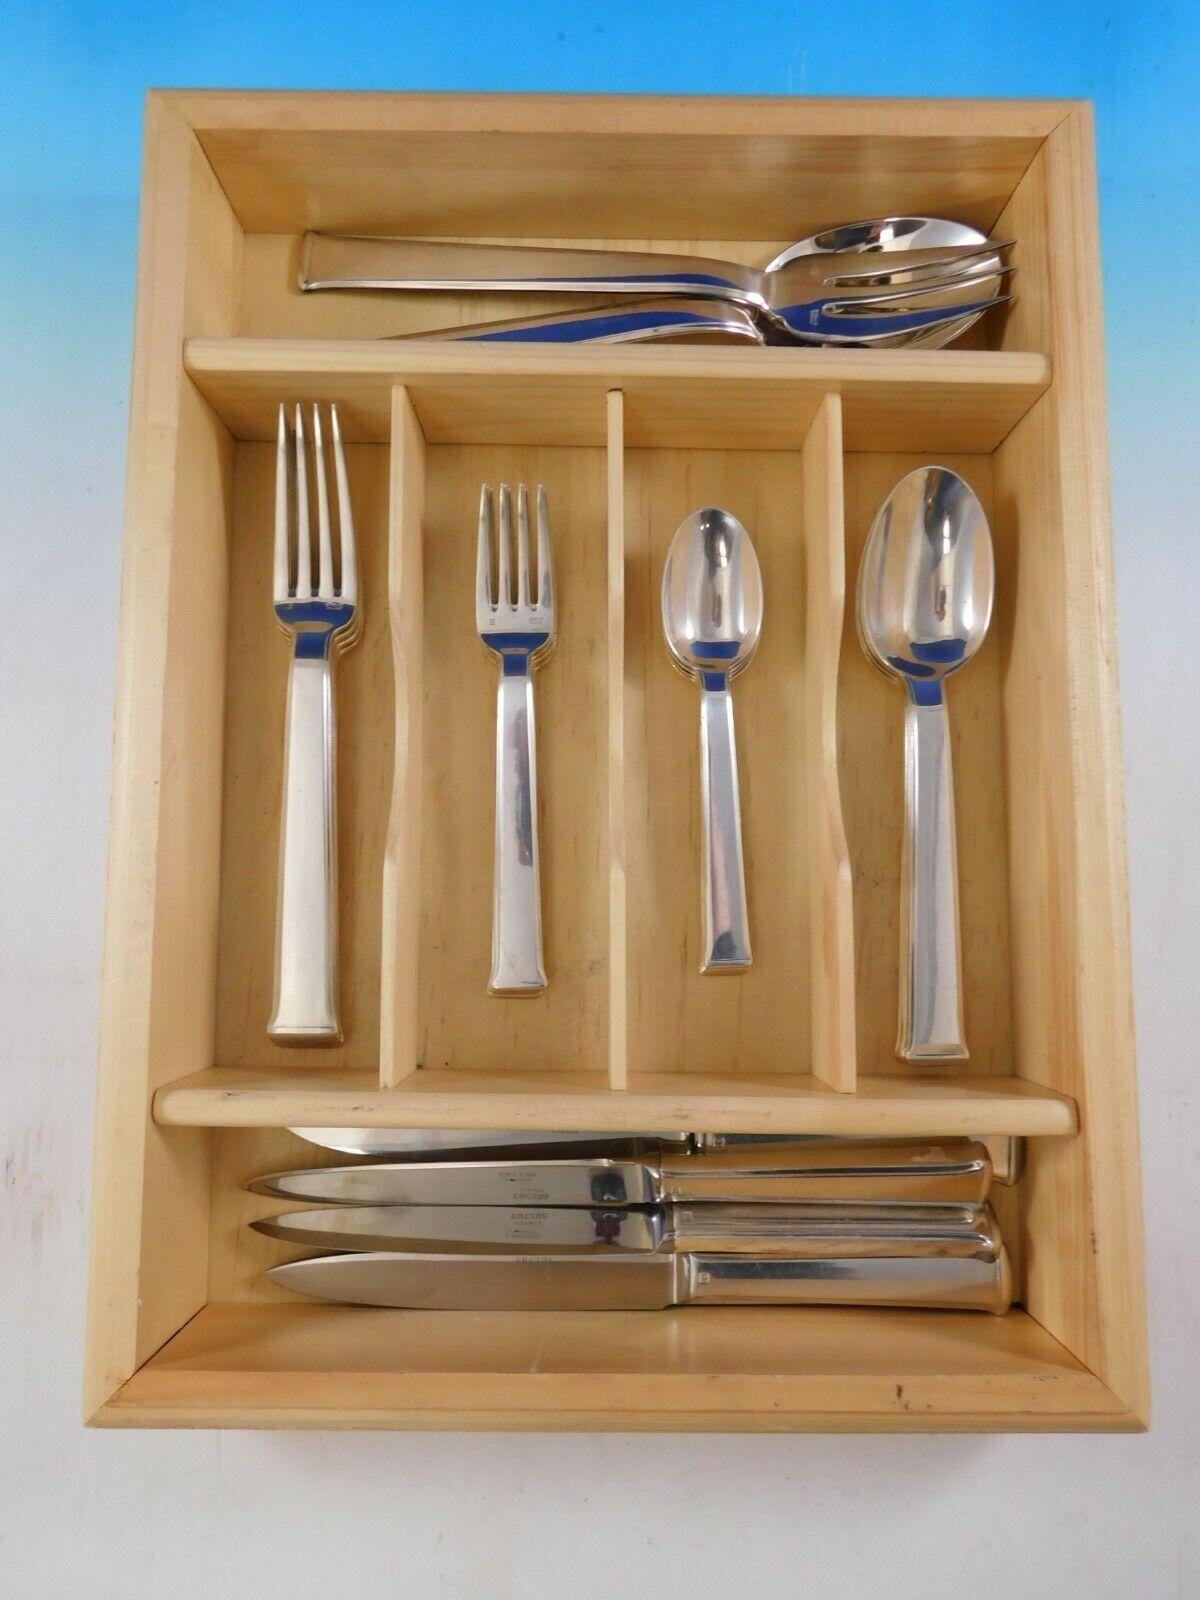 Sequoia by Erquis French silver plated dinner size flatware set, 22 pieces. Great starter set! This estate set includes:

4 dinner knives, 9 5/8